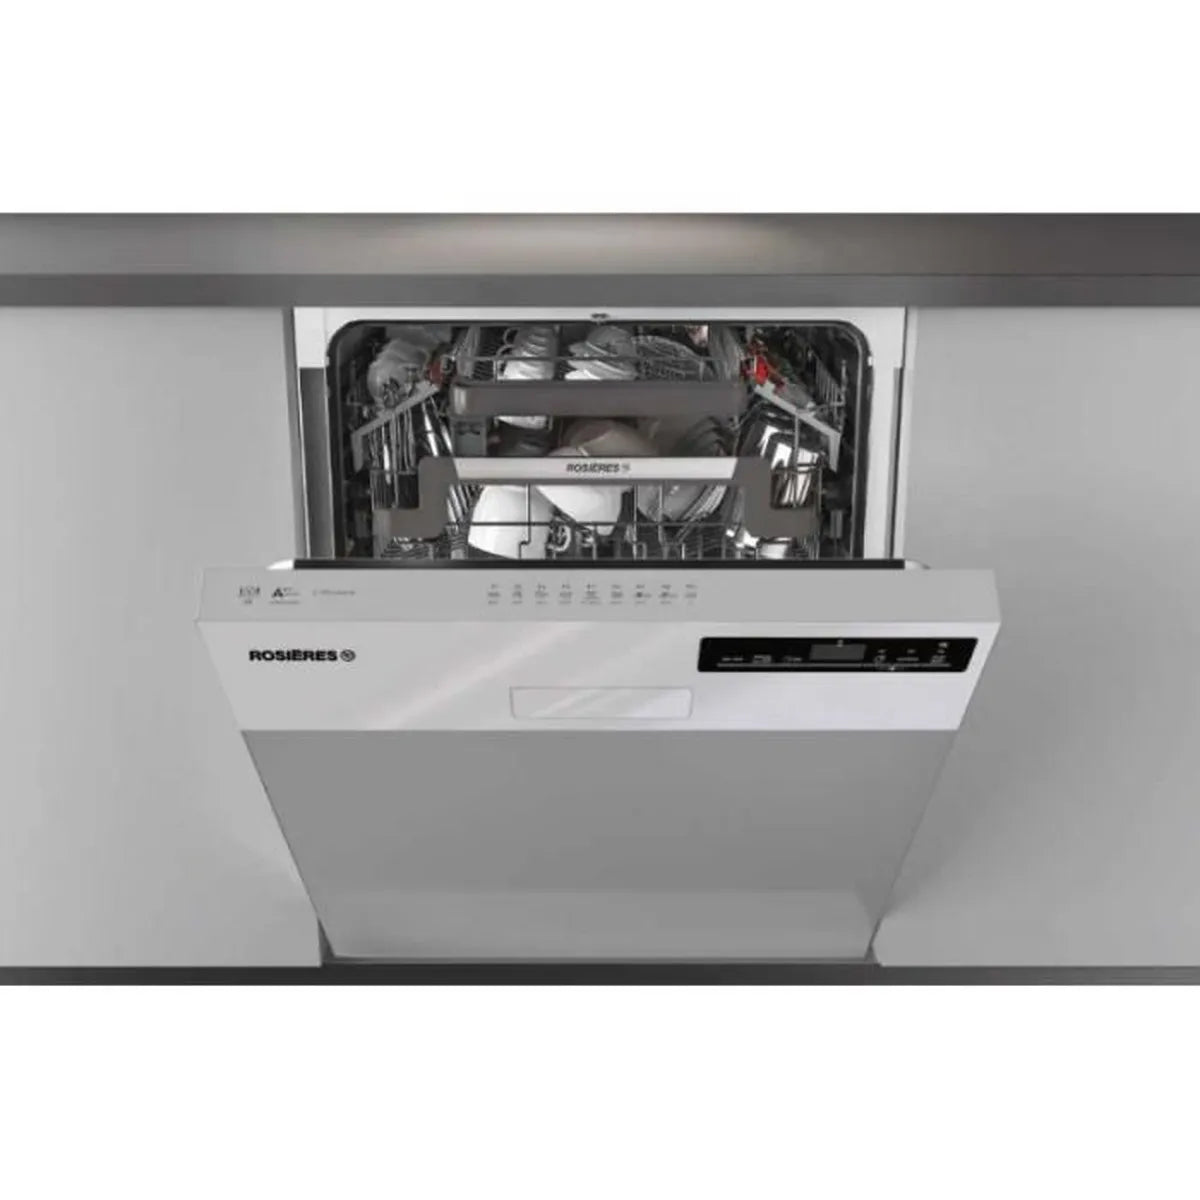 ROSIERES RDSN2D622PX Semi-Integrated, Dishwasher, Panel, 16 Place Settings, 60cm, Inox